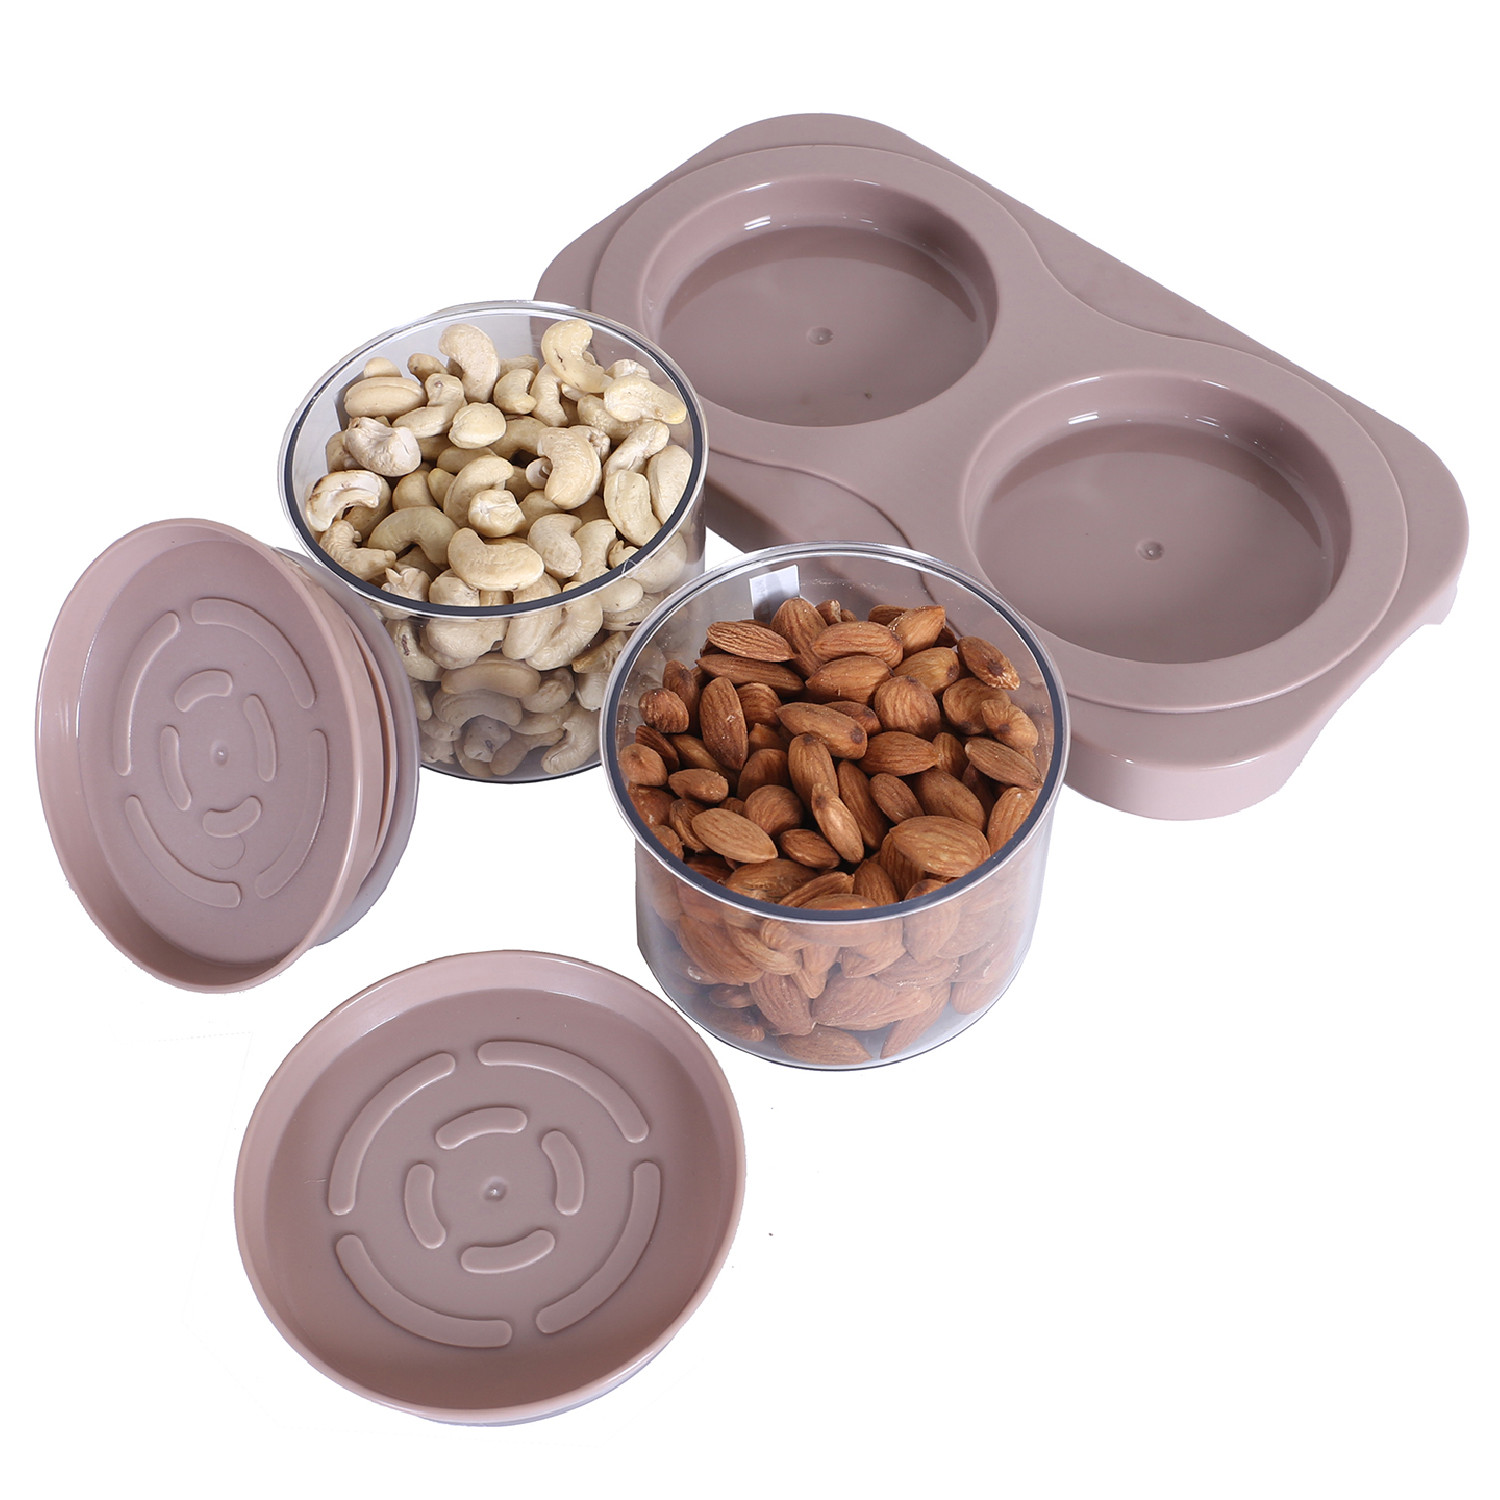 Kuber Industries 2 Containers & Tray Set|Unbreakable Plastic Snackers,Cookies,Nuts Serving Tray|Airtight Containers with Lid,350 ml (Peach)